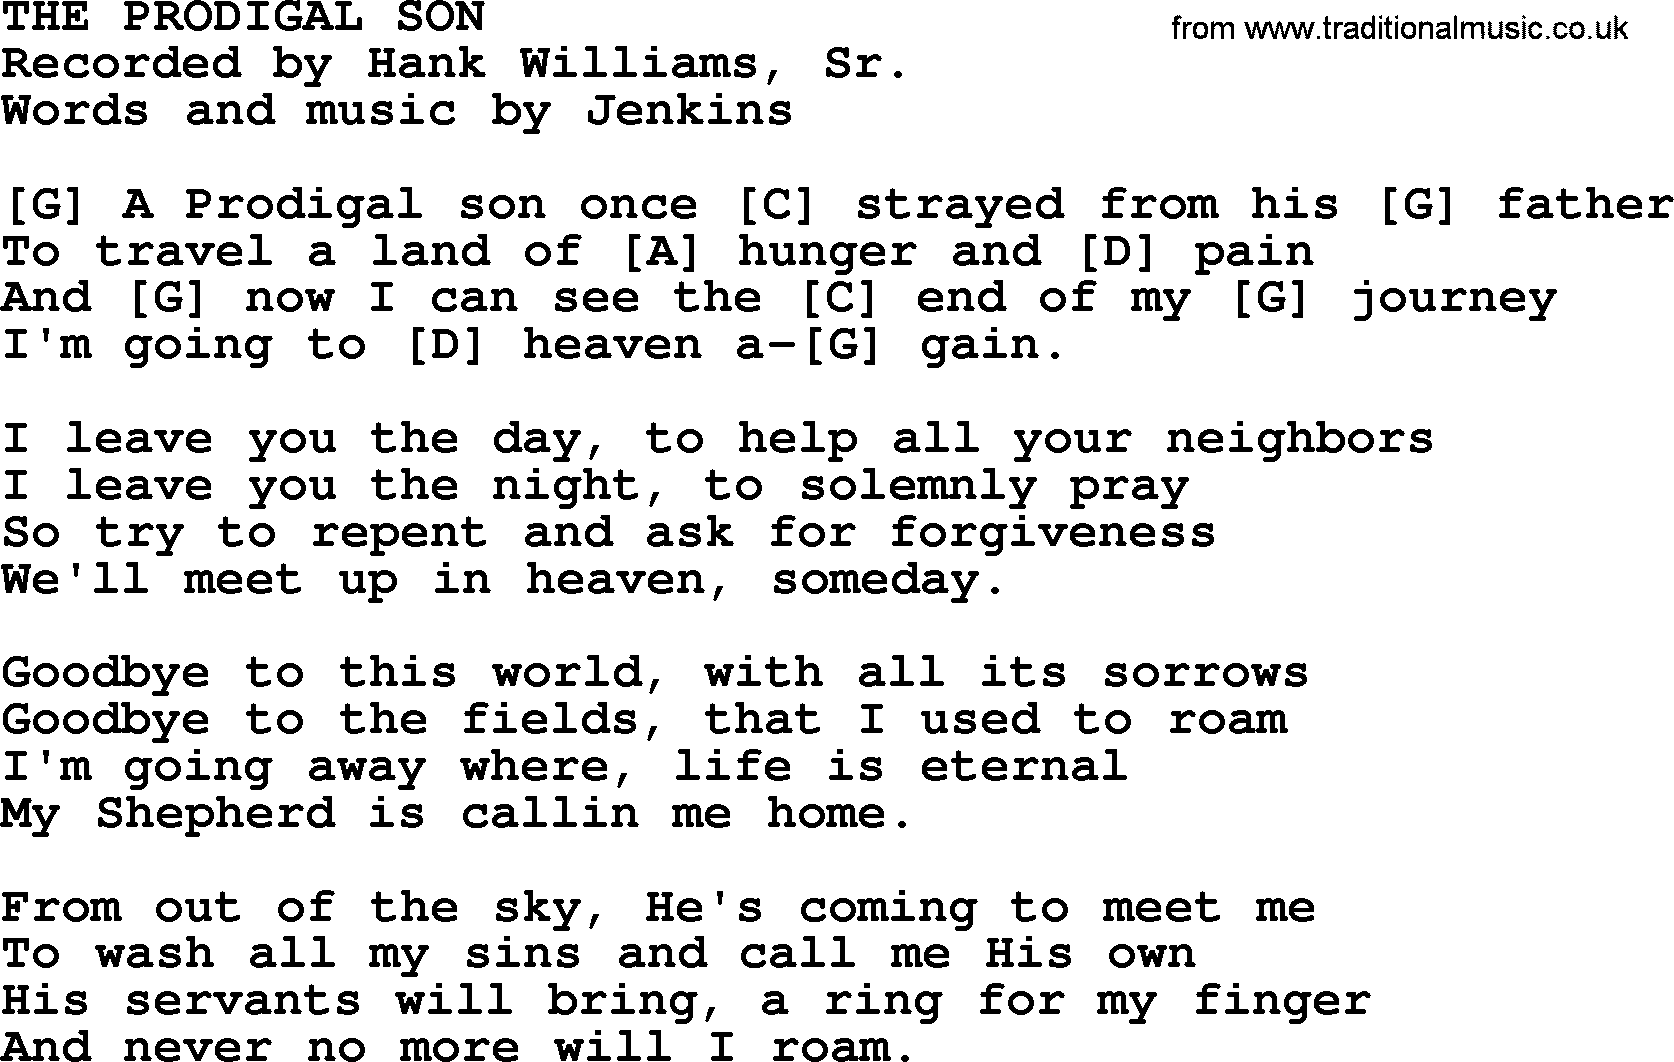 Hank Williams song The Prodigal Son, lyrics and chords